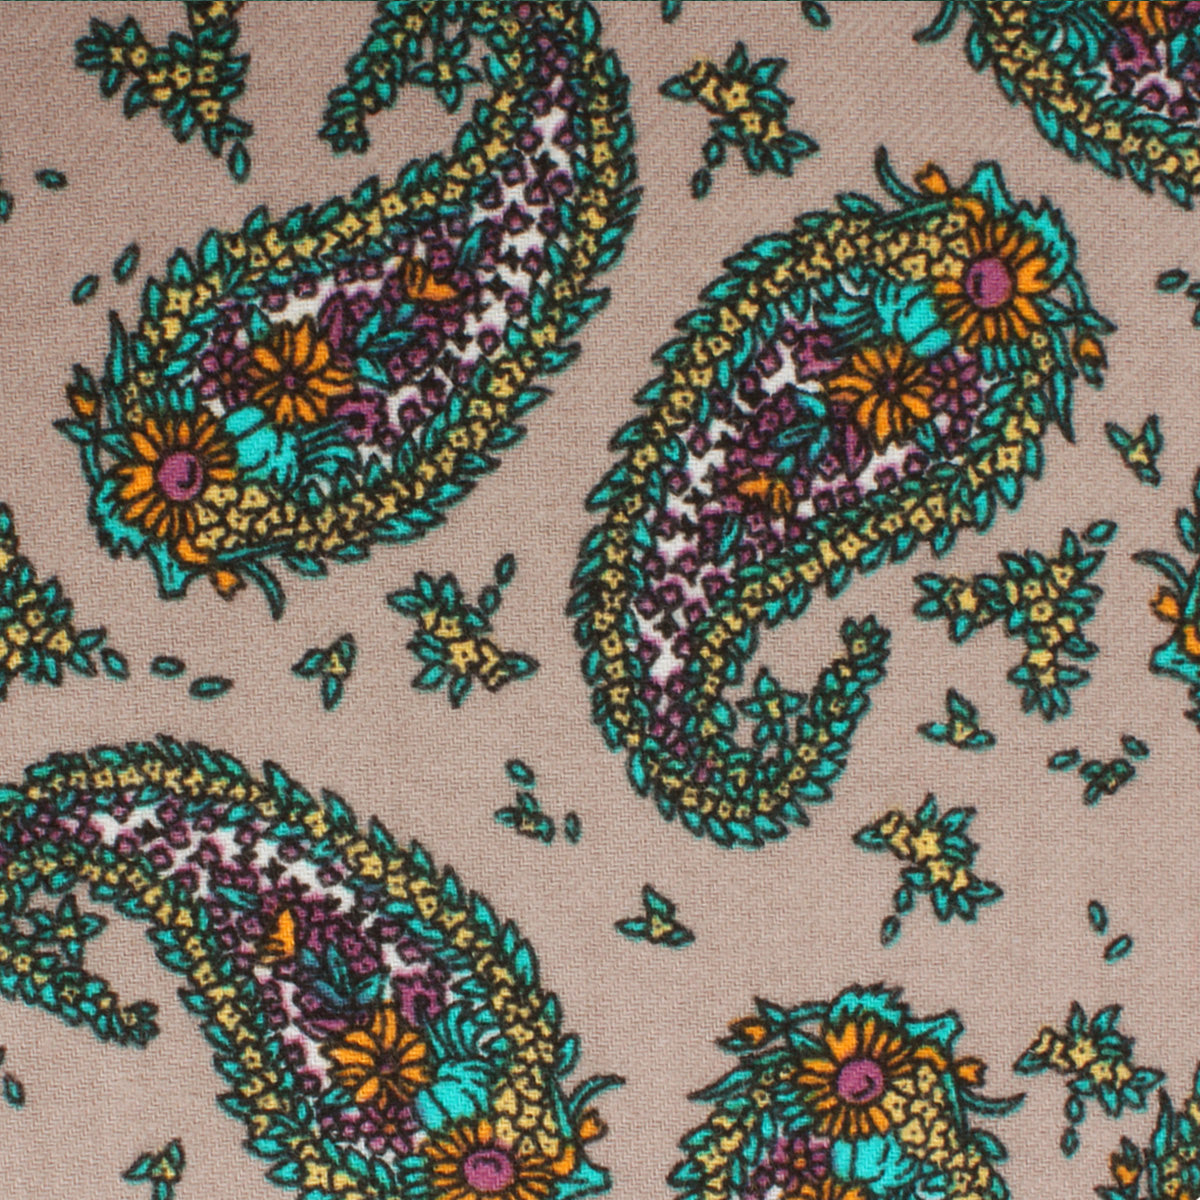 Bay of Kotor Light Brown Paisley Fabric Swatch